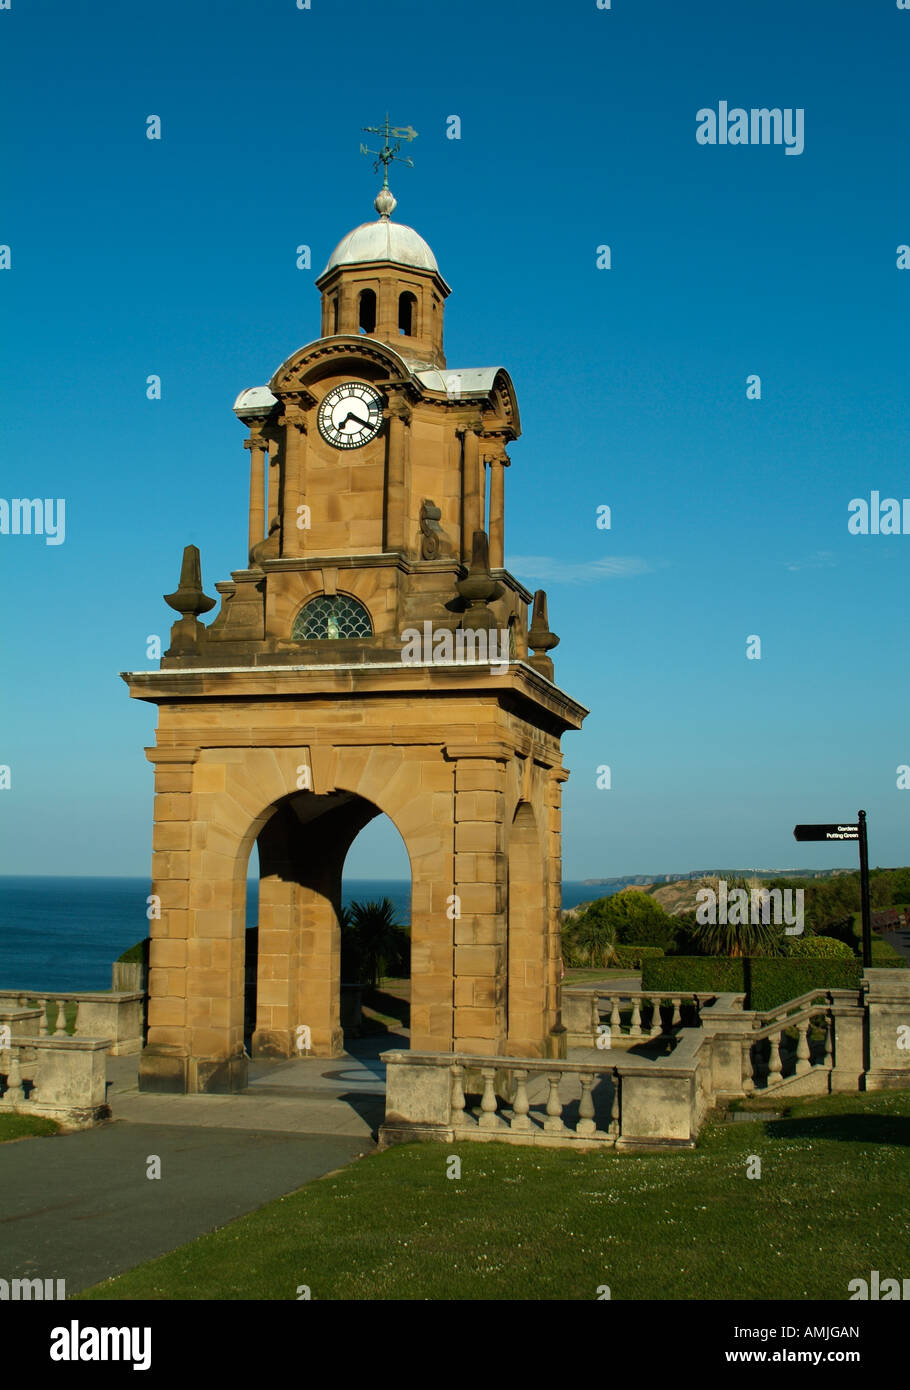 The Clock tower on the Esplanade South Cliff Scarborough Stock Photo